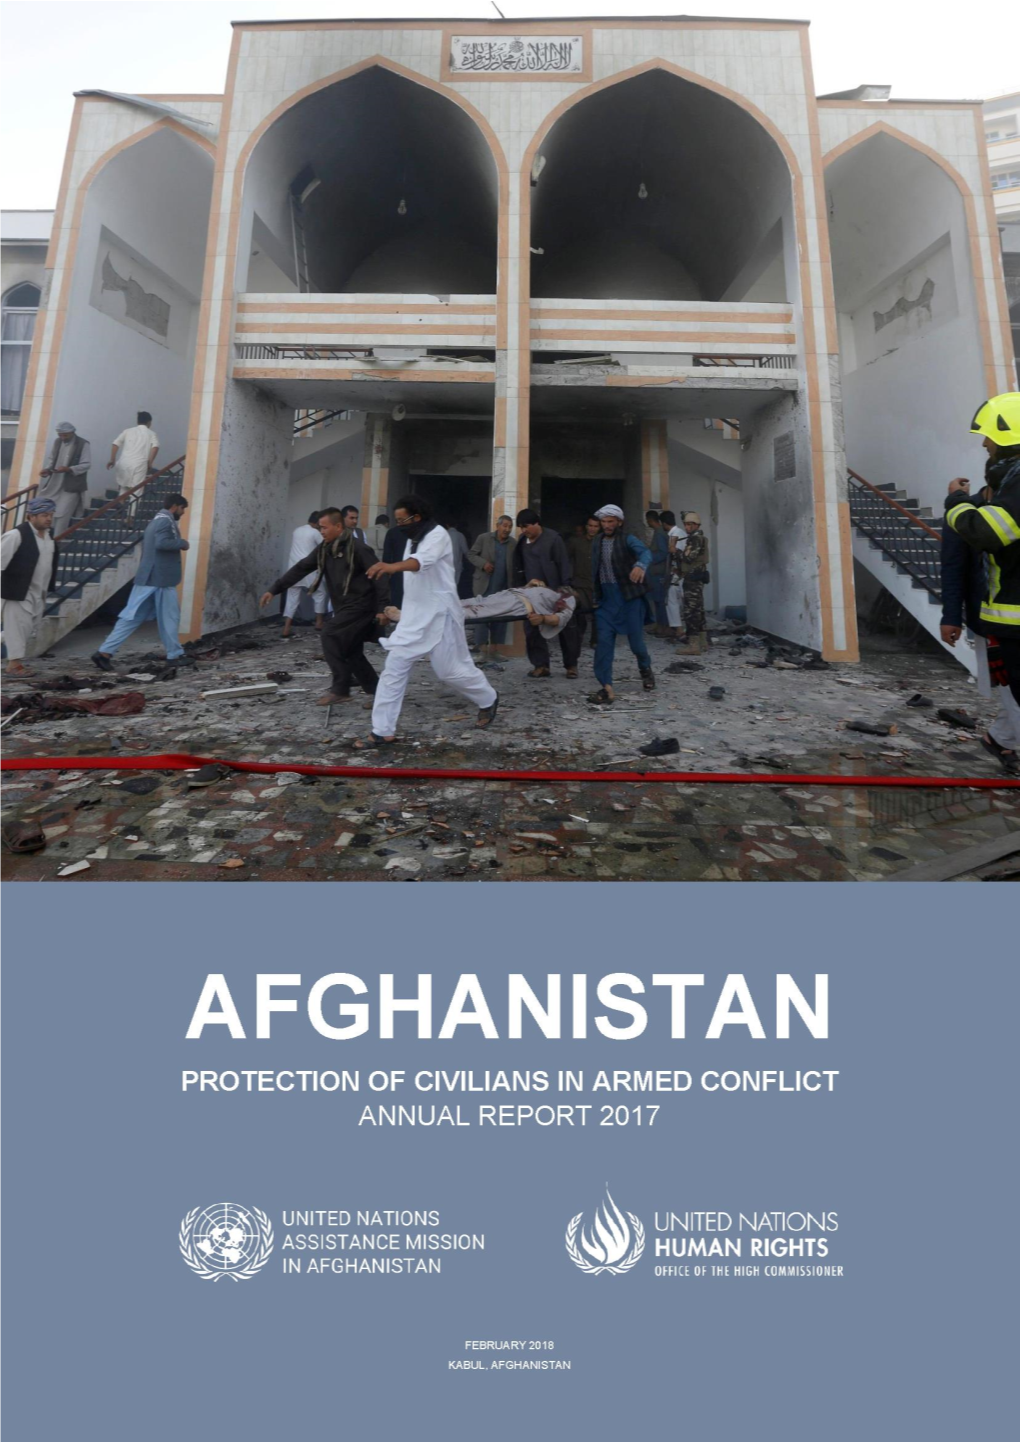 Afghanistan Annual Report on Protection of Civilians In